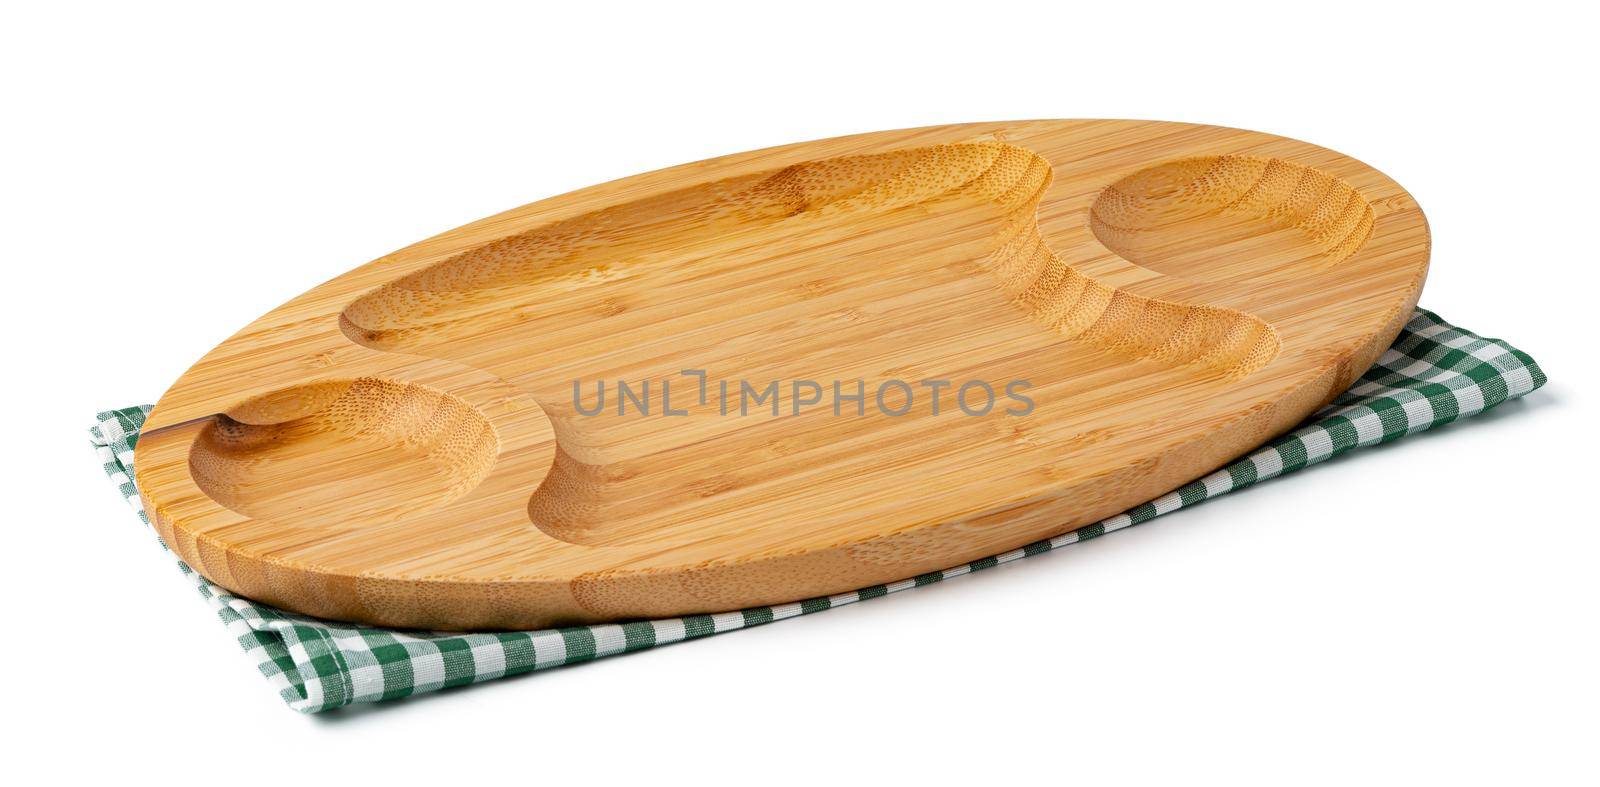 Wooden plate and tablecloth on white background by Fabrikasimf